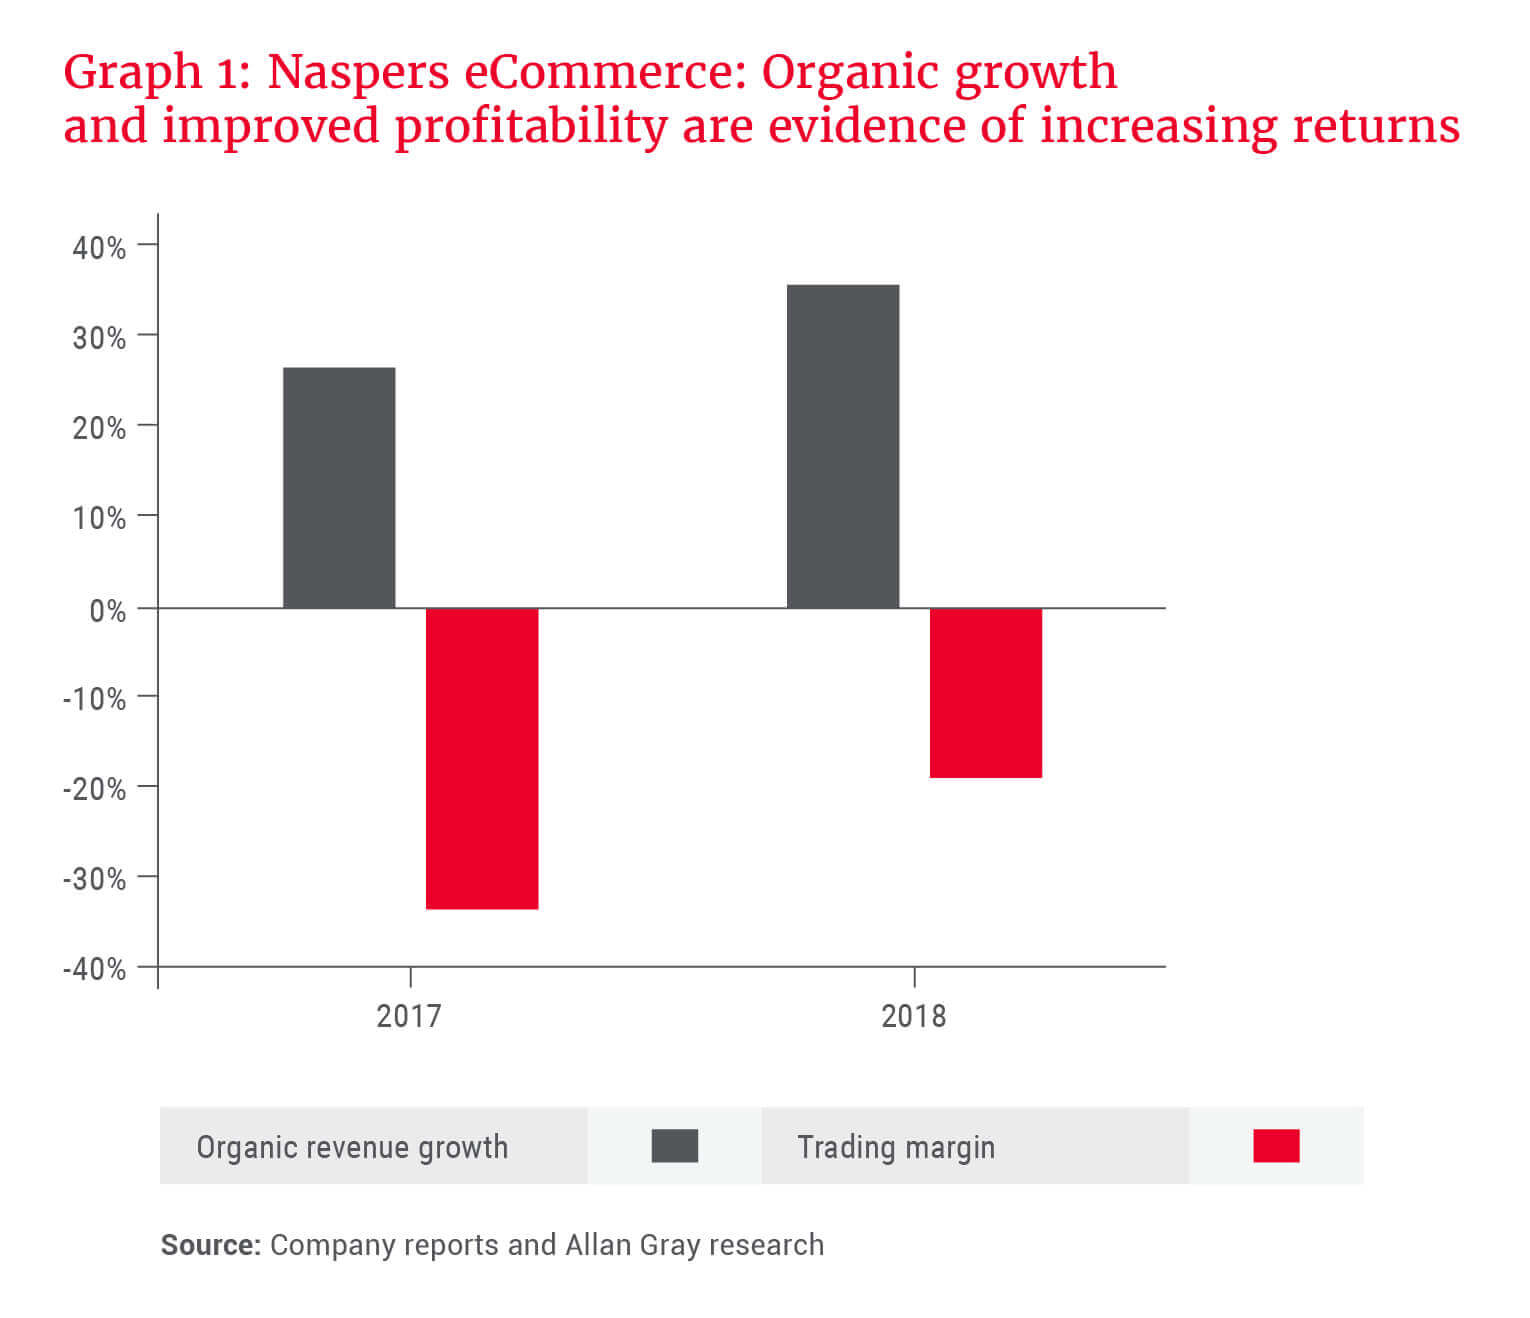 Naspers eCommerce: Organic growth and improved profitability are evidence of increasing returns - Allan Gray